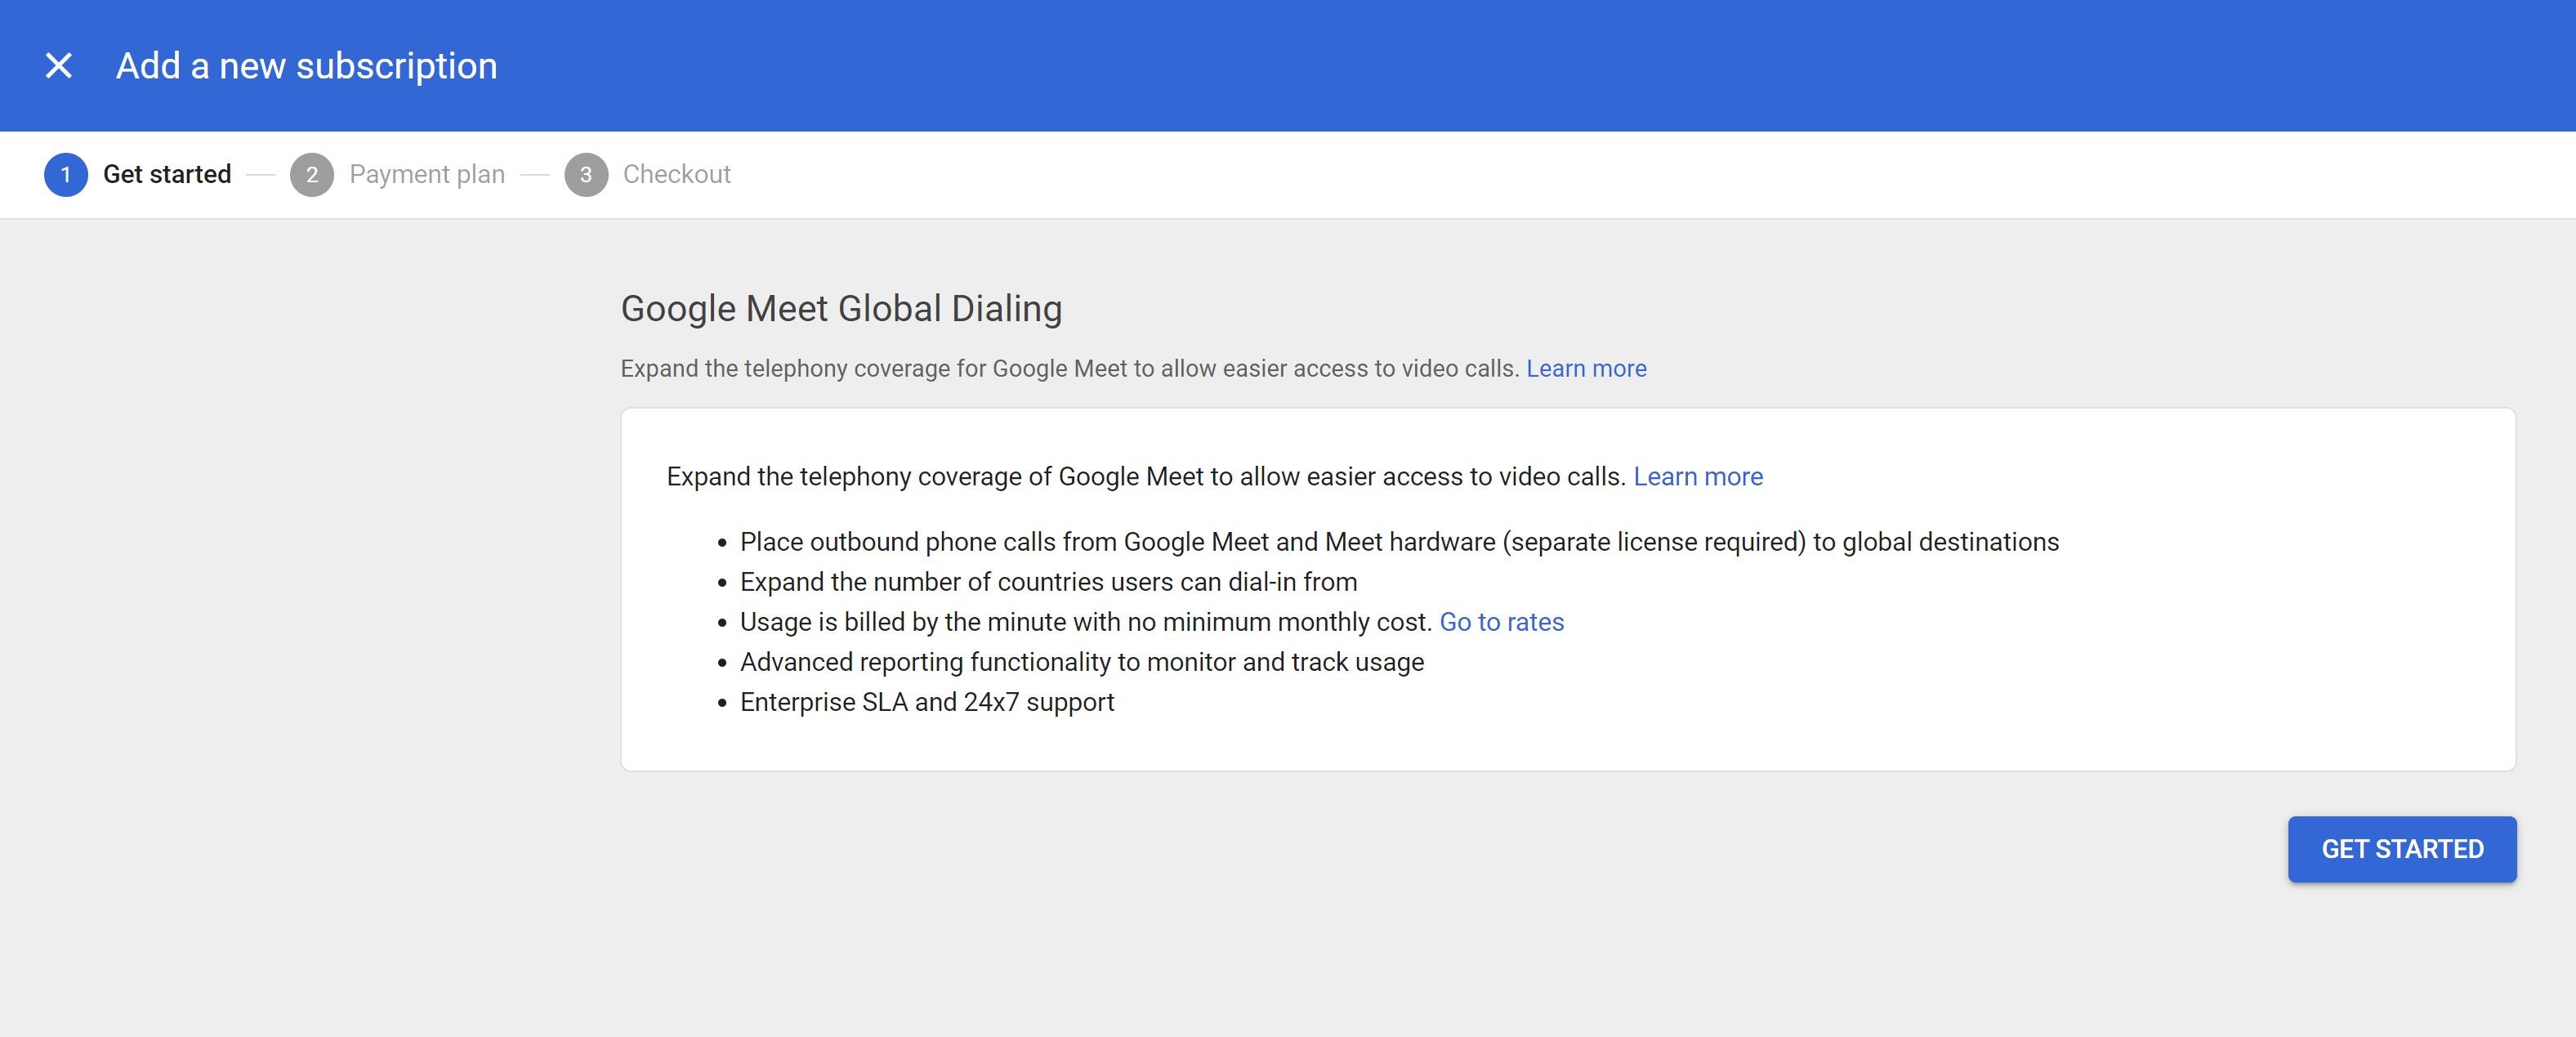 Purchase steps for Google Meet Global Dialing